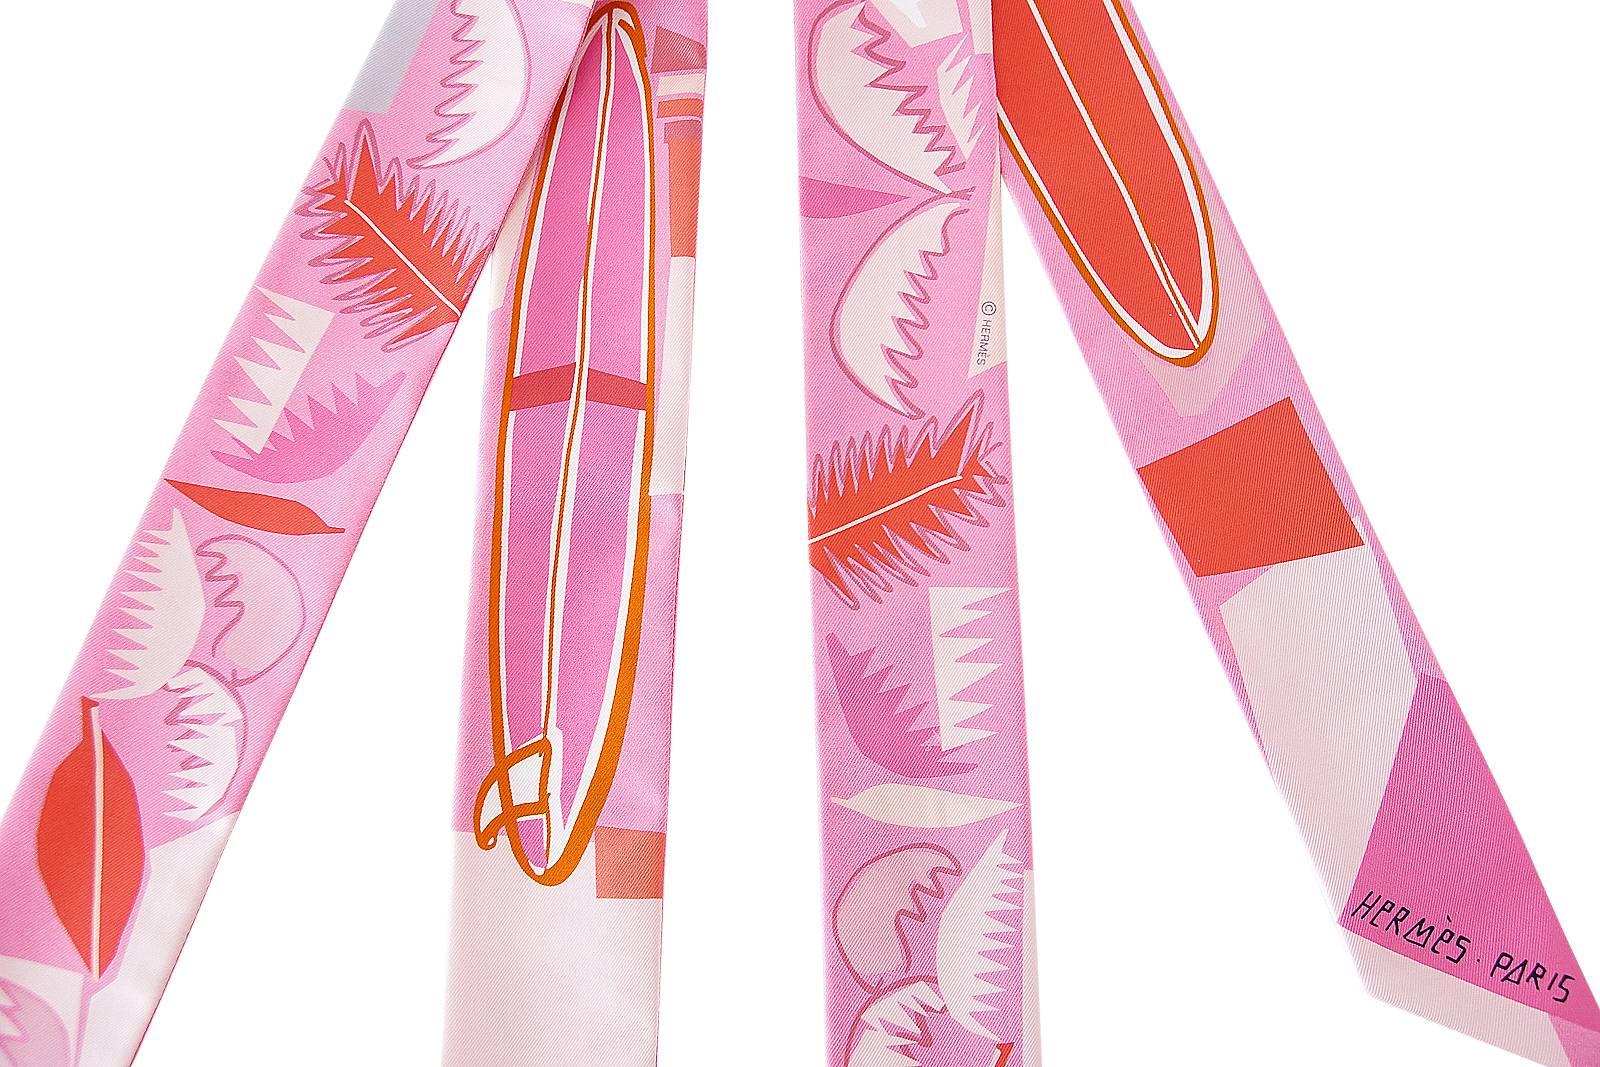 Guaranteed authentic Hermes Twilly in Sea Surf and Fun limited edition.
Perfect fresh summer pinks.
Tropical palms and surfboards.
Each one comes with Hermes box.
final sale
NEW or NEVER WORN
final sale

Did you know:  The first scarf designed for